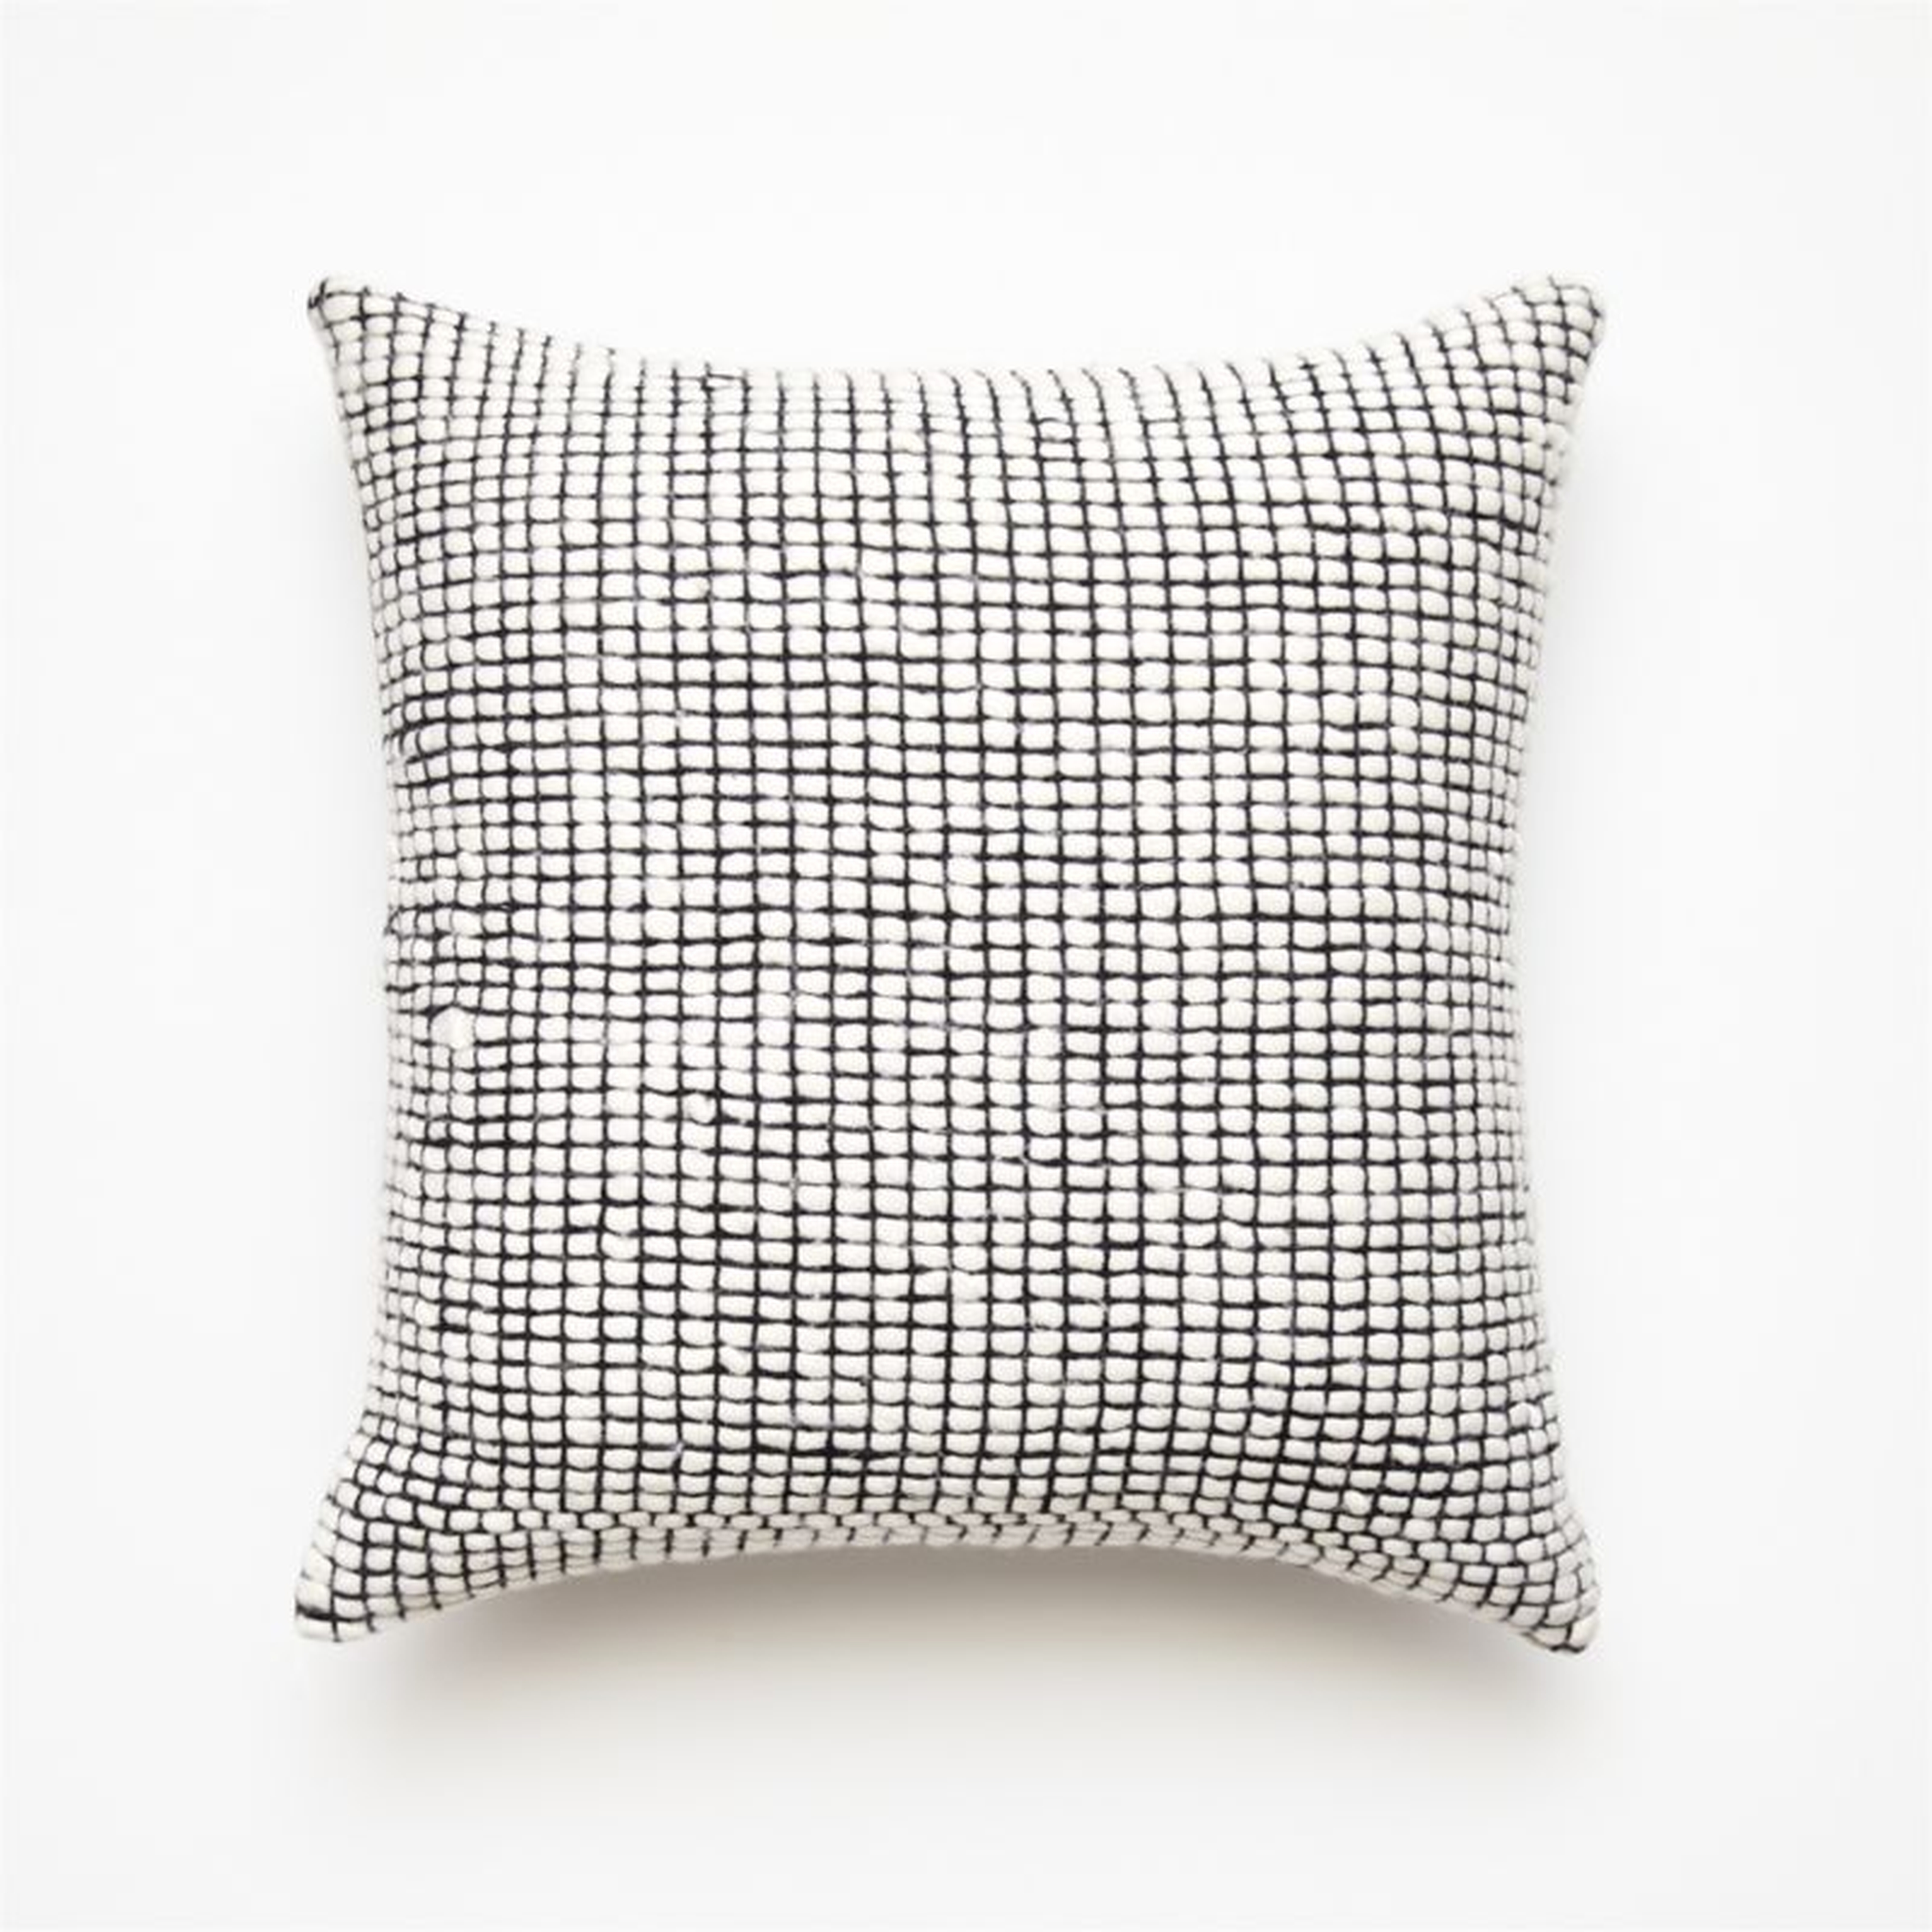 Keelie Ivory Grid Throw Pillow with Feather-Down Insert 23" - CB2